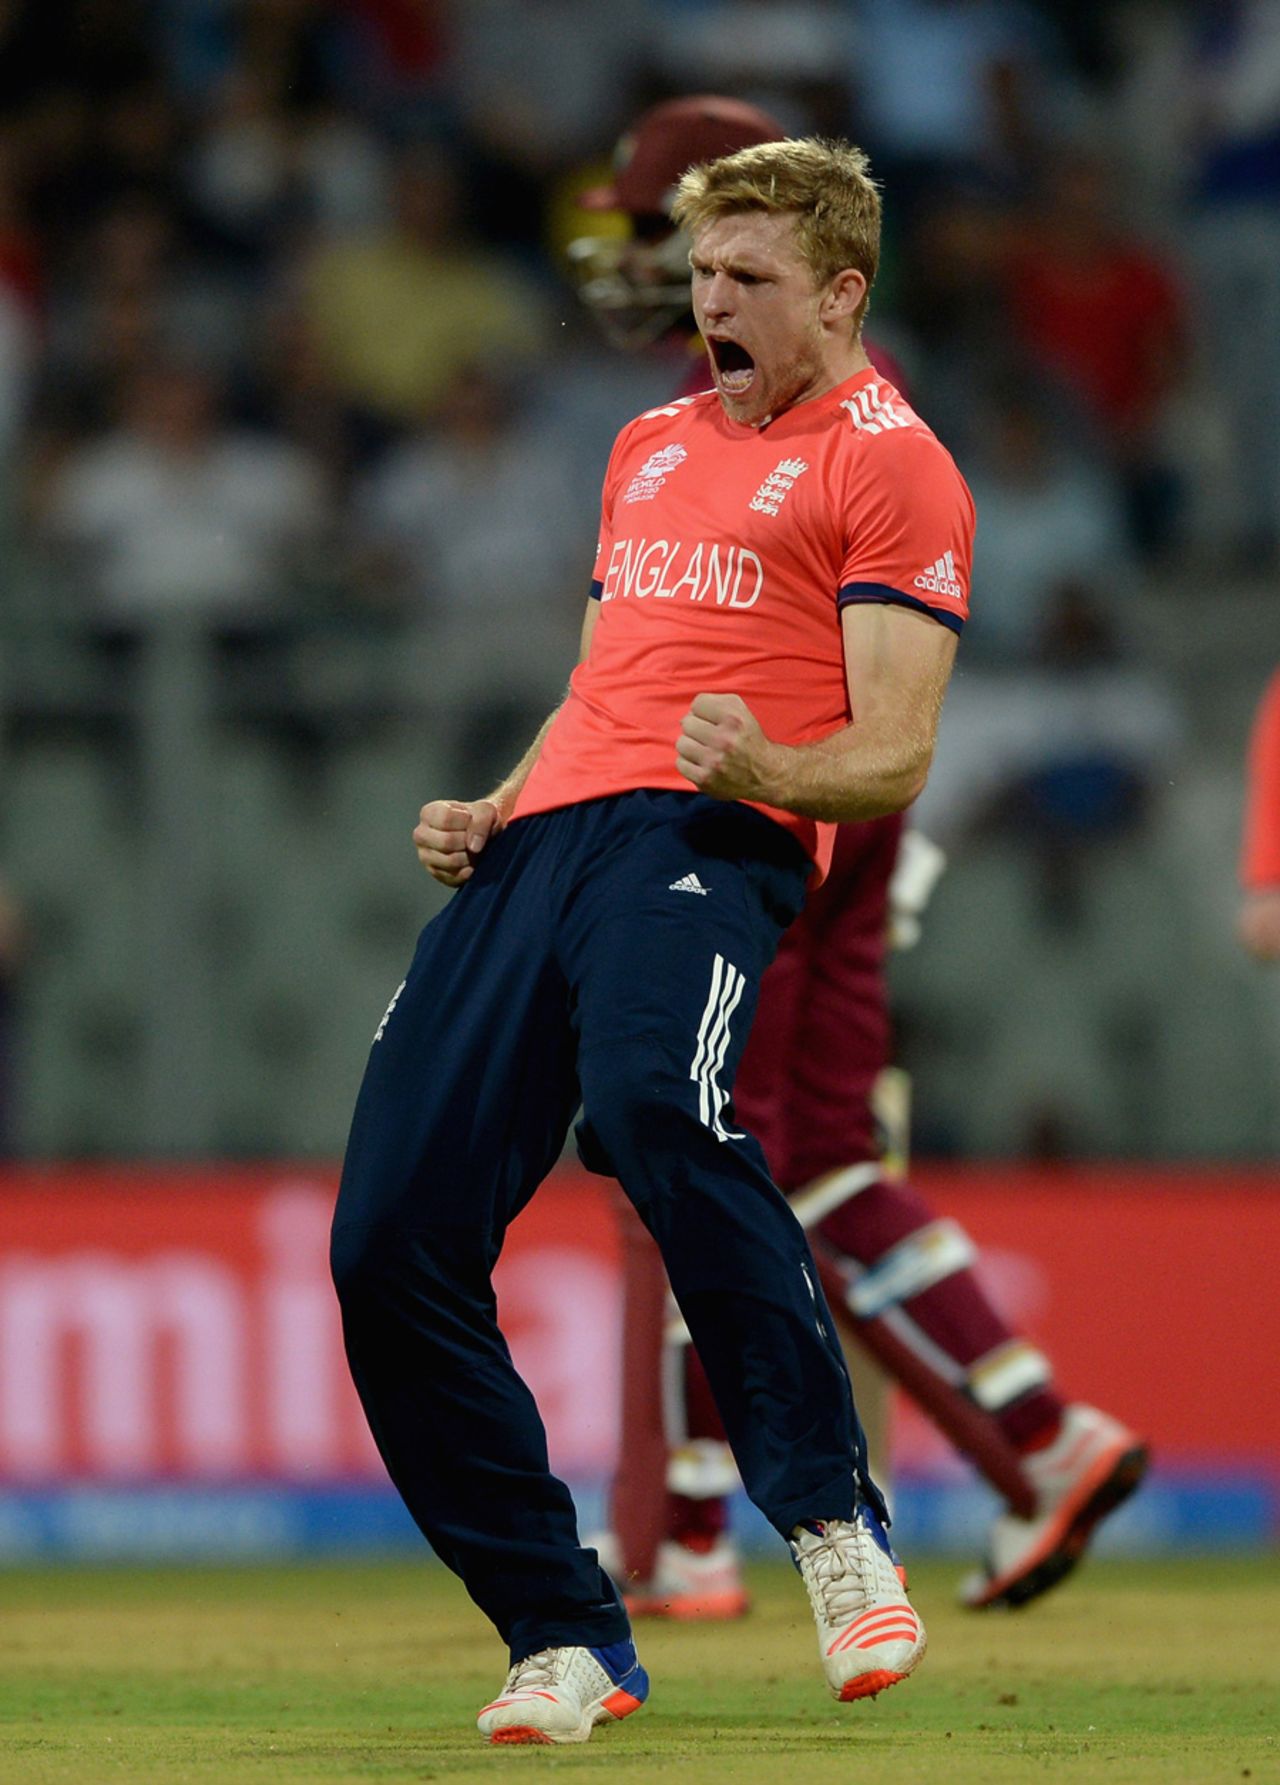 David Willey is pumped after dismissing Johnson Charles off his second ball, England v West Indies, World T20 2016, Group 1, Mumbai, March 16, 2016